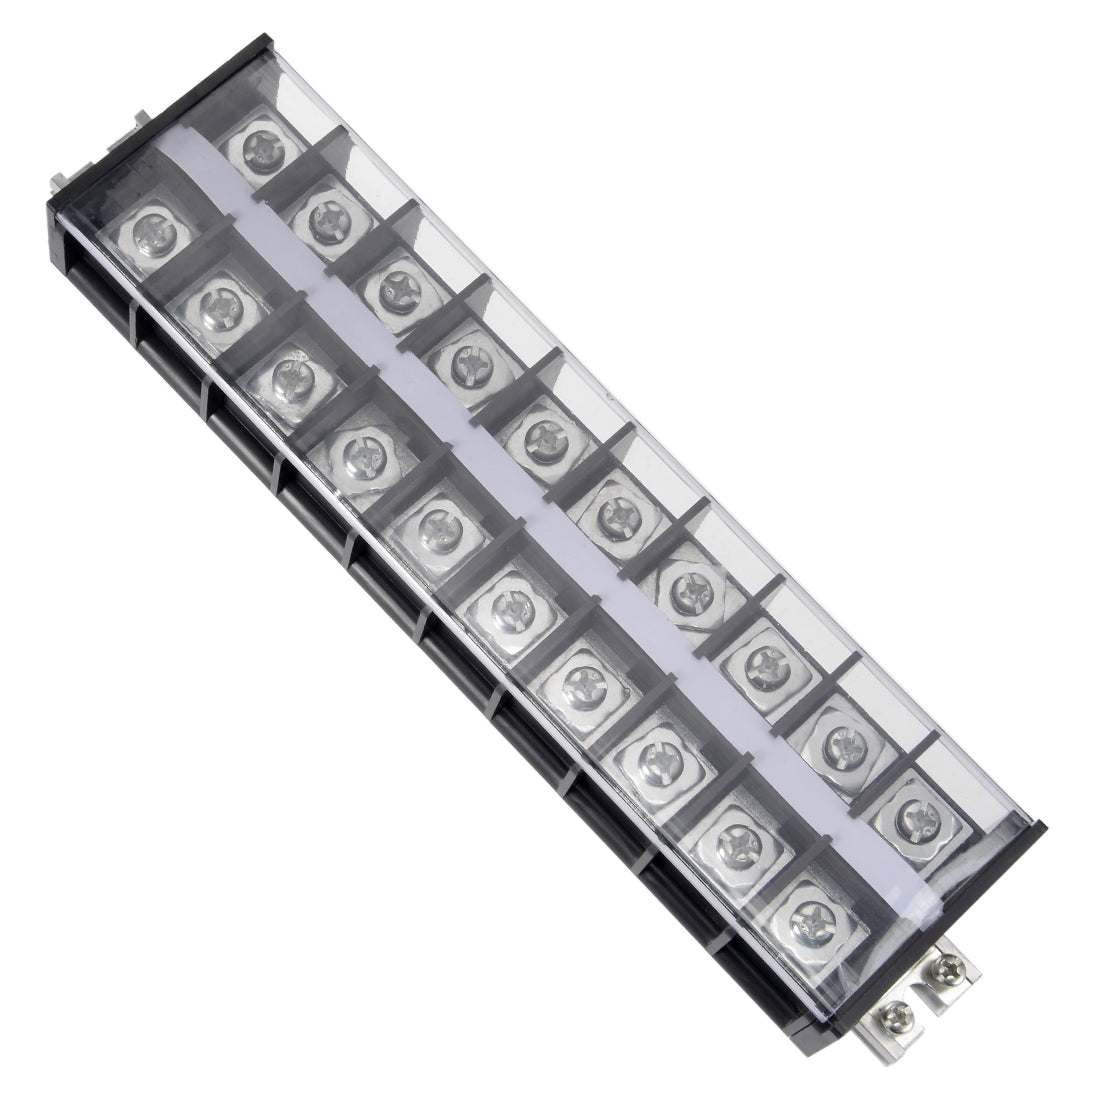 uxcell Uxcell Barrier Terminal Strip Block 660V 100A Dual Rows 10P DIN Rail Base Screw Connector